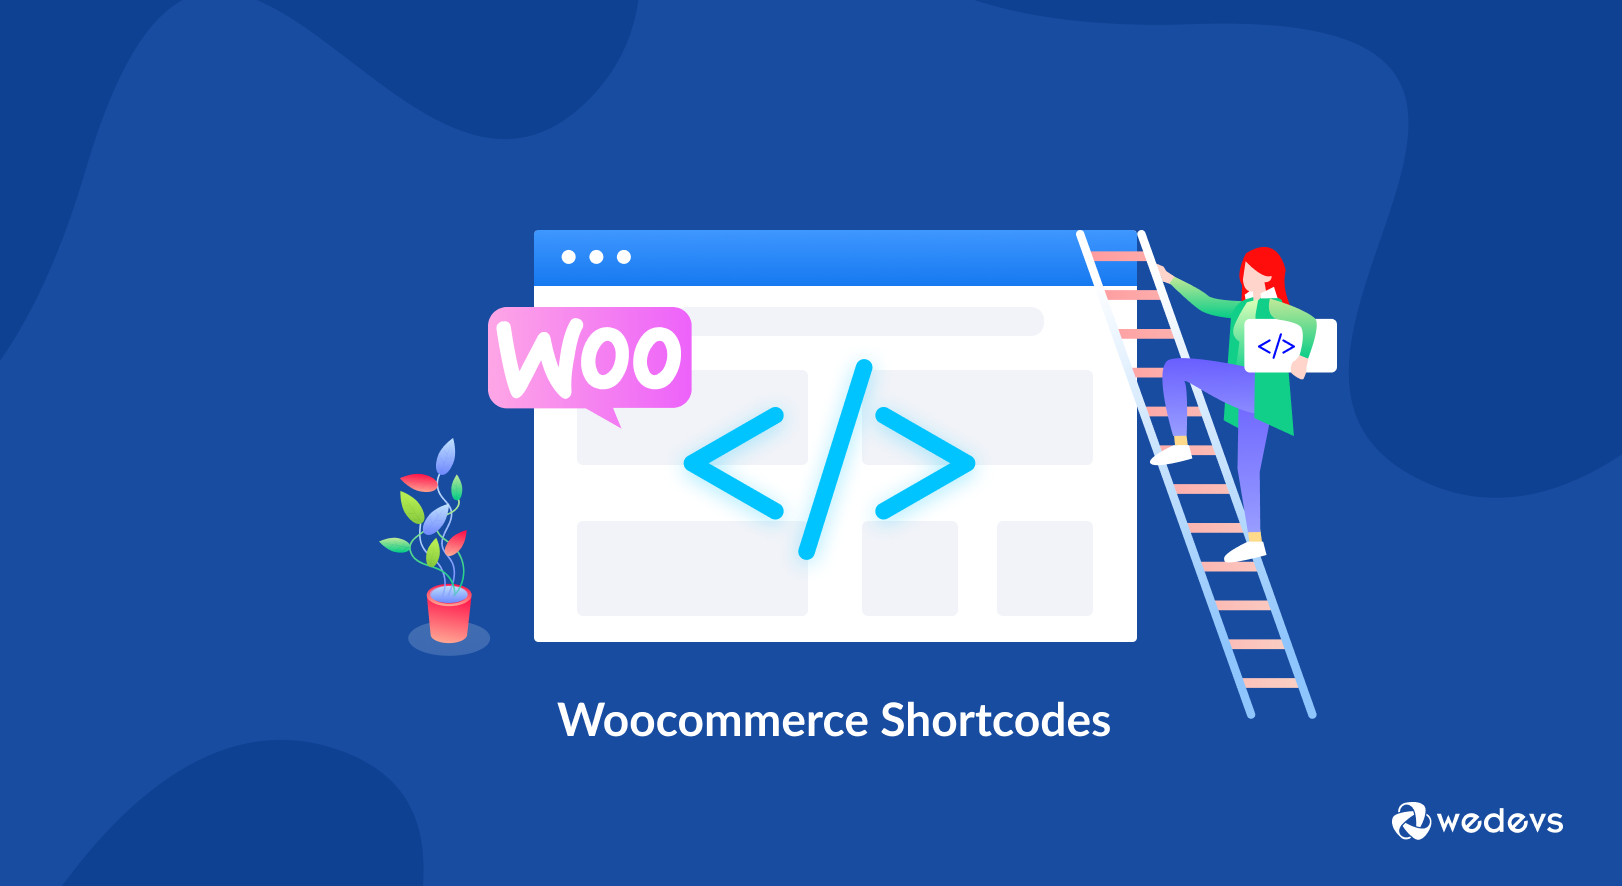 Essential WooCommerce Shortcodes to Customize Your Online Store on WordPress